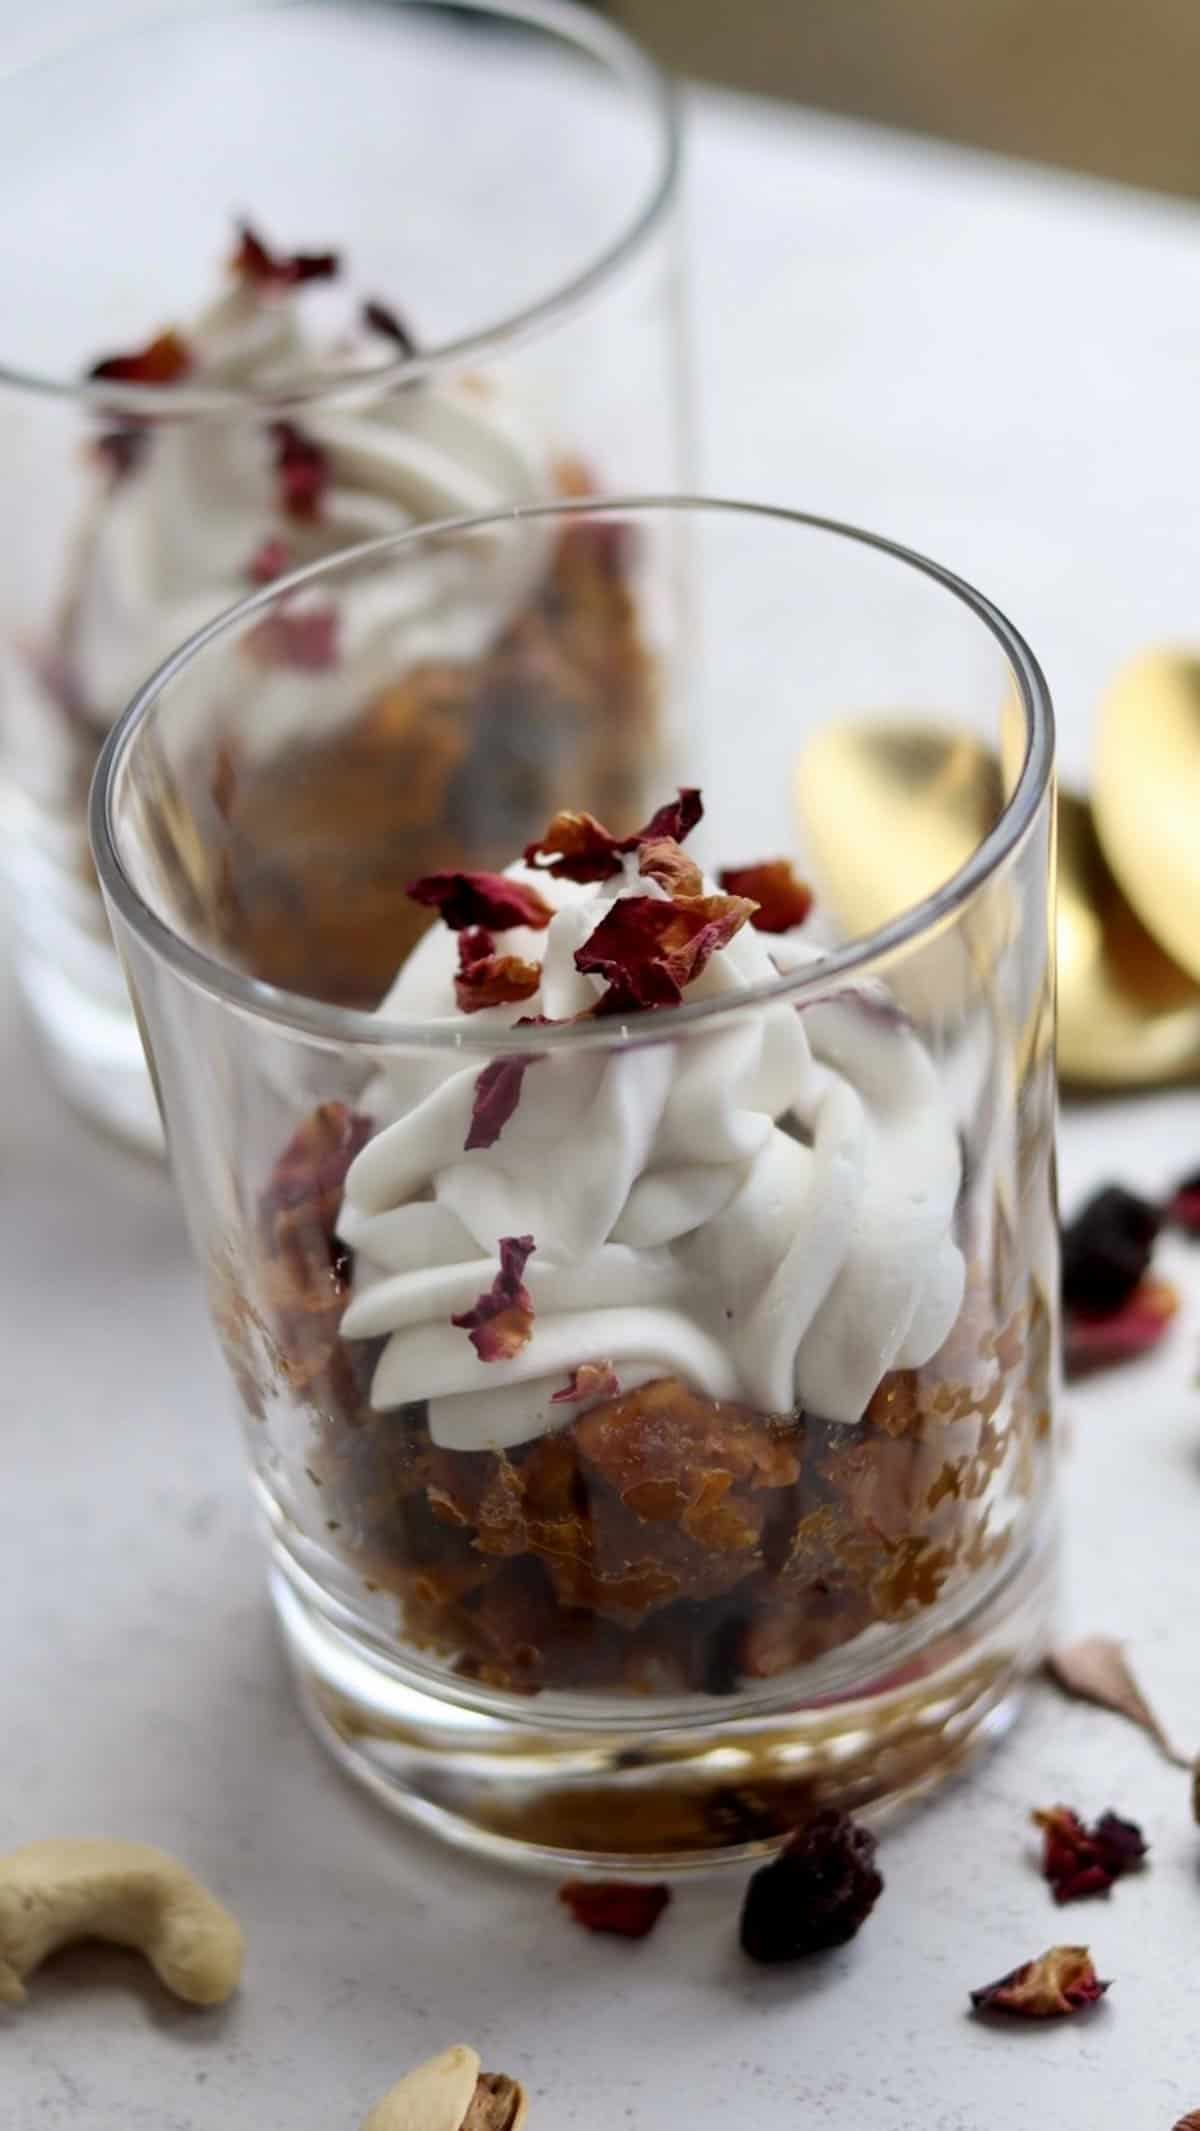 These highly indulgent vegan gajar halwa jars are a modern take on the classic Indian dessert gajar halwa or carrot halwa, topped with fresh coconut whipped cream and dry rose petals. 